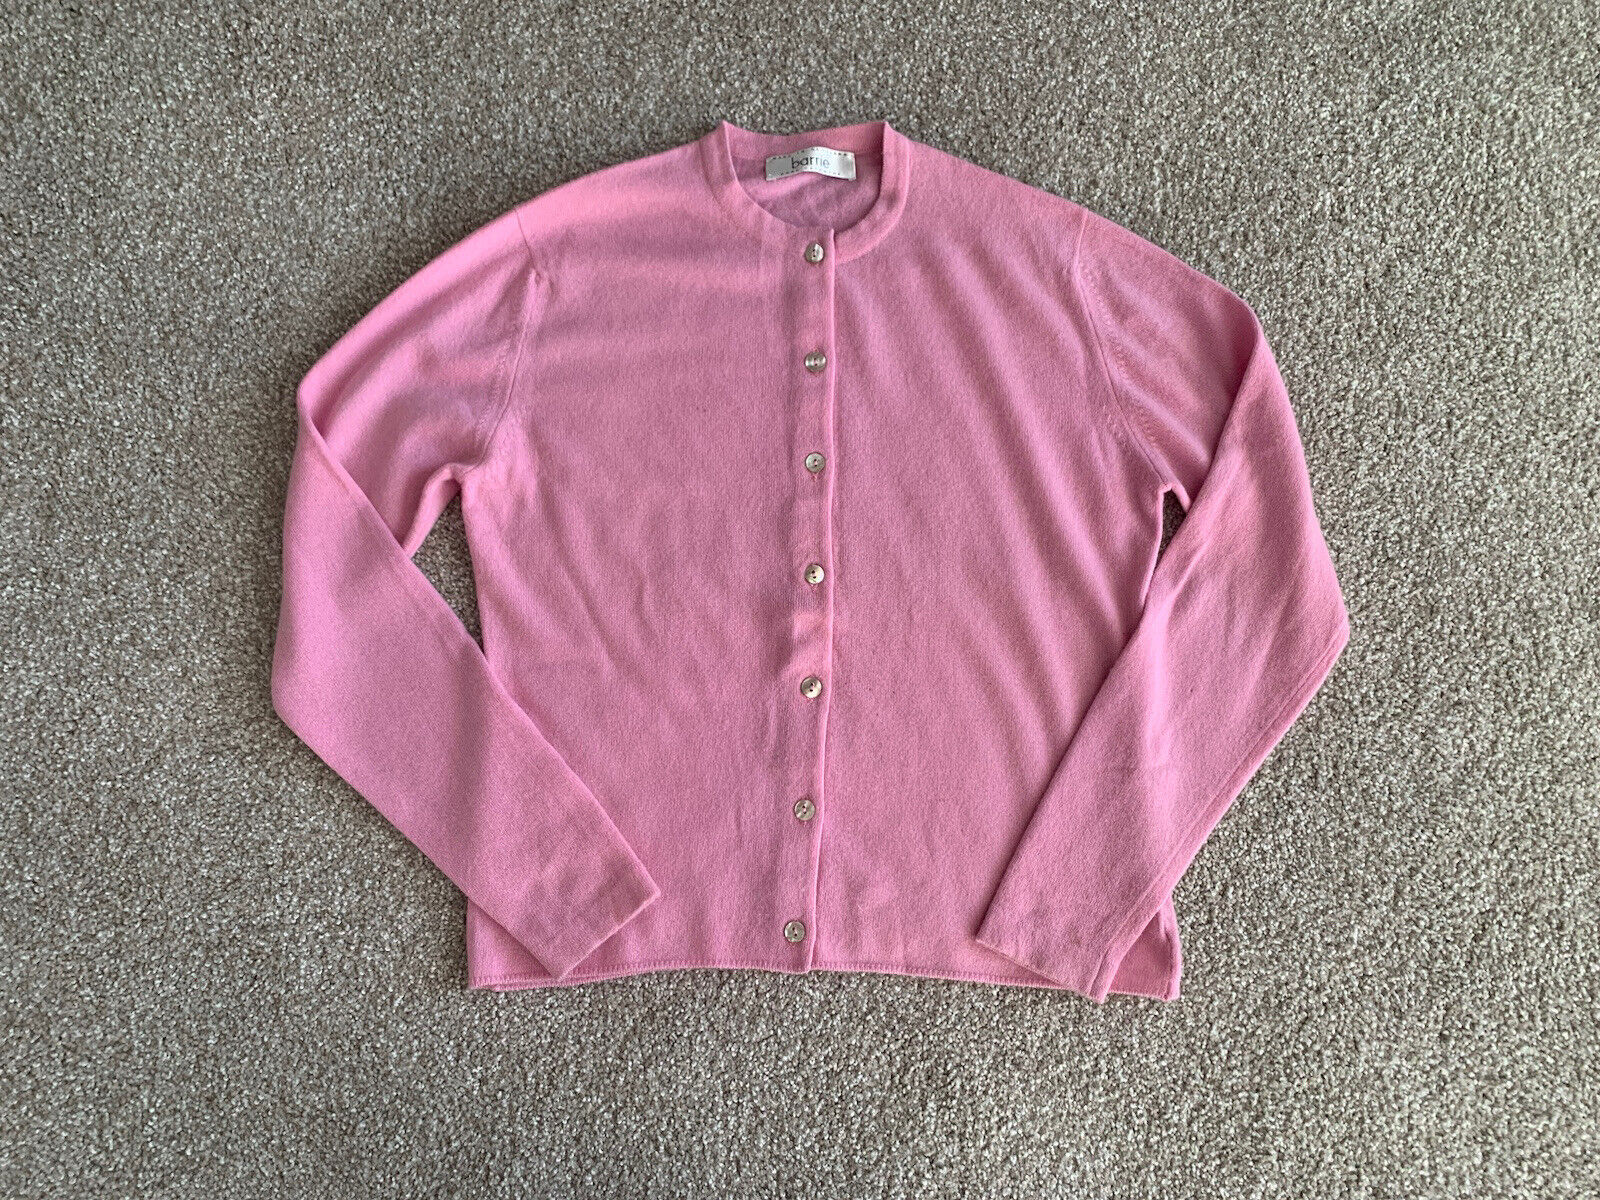 BARRIE Women’s Made In Scotland 100% Pure Cashmere S/M Pink Sweater Size 40”